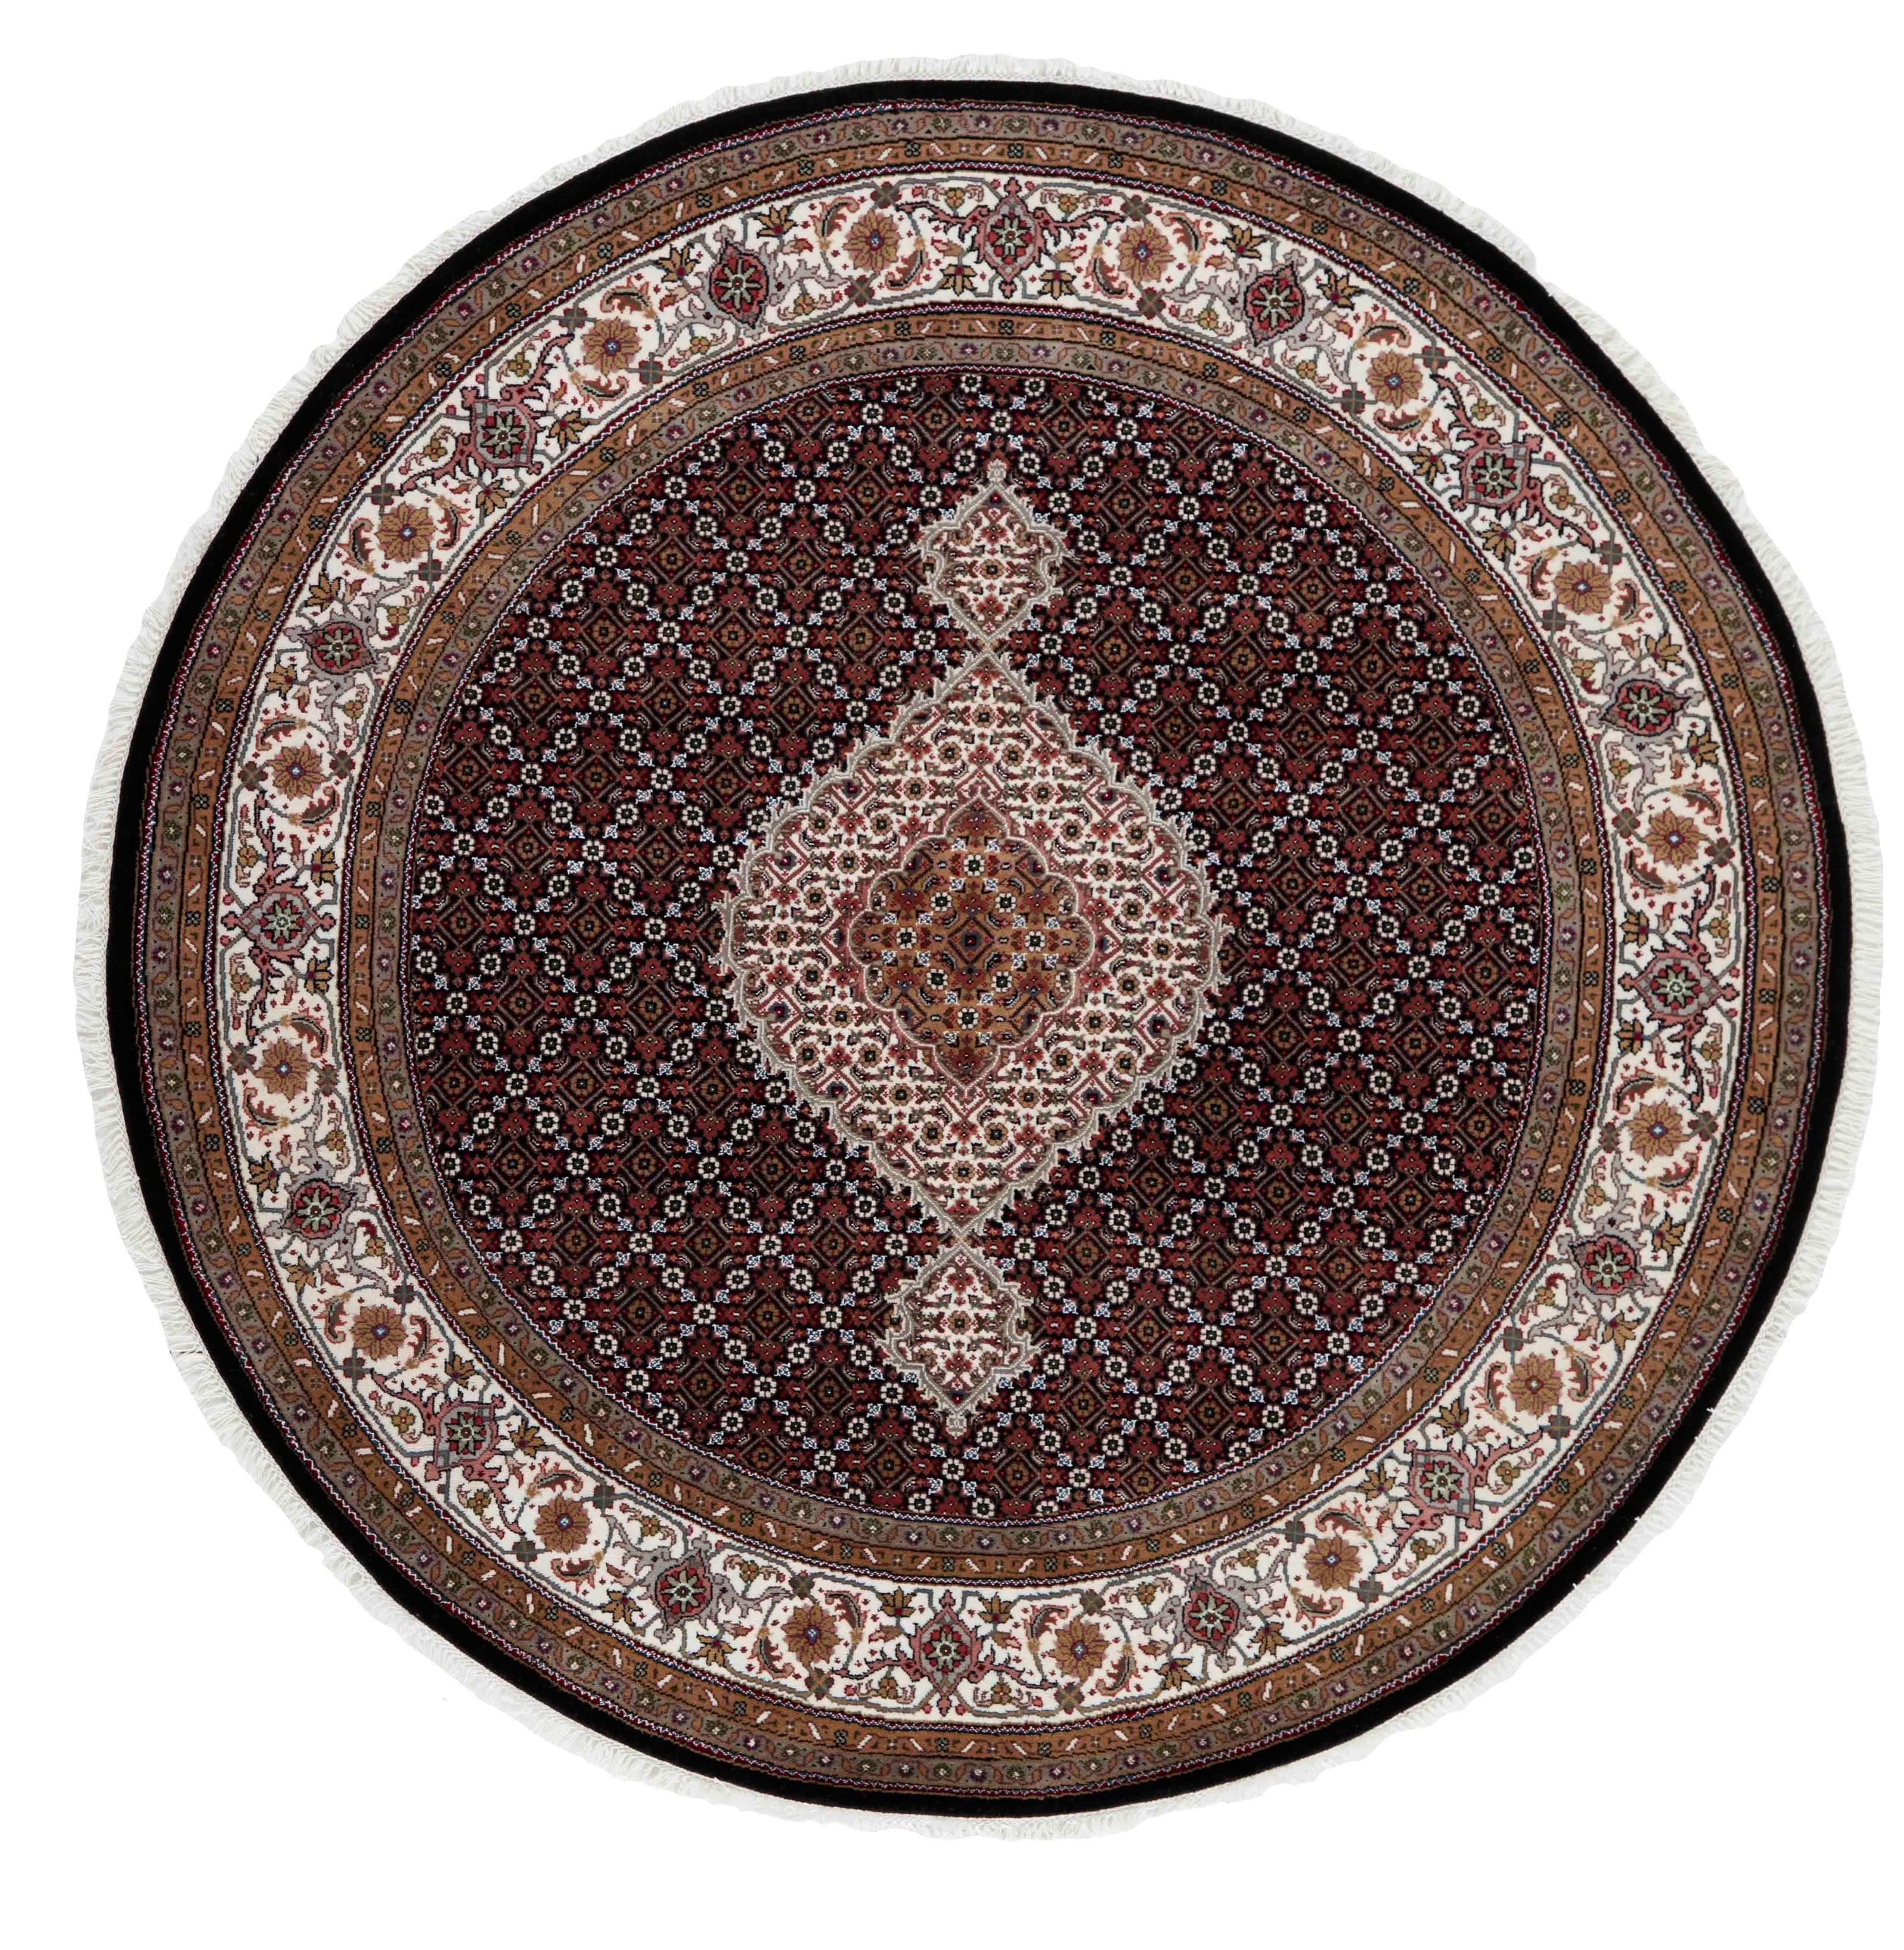 round Oriental rug with traditional geometric and floral design in red, beige and black